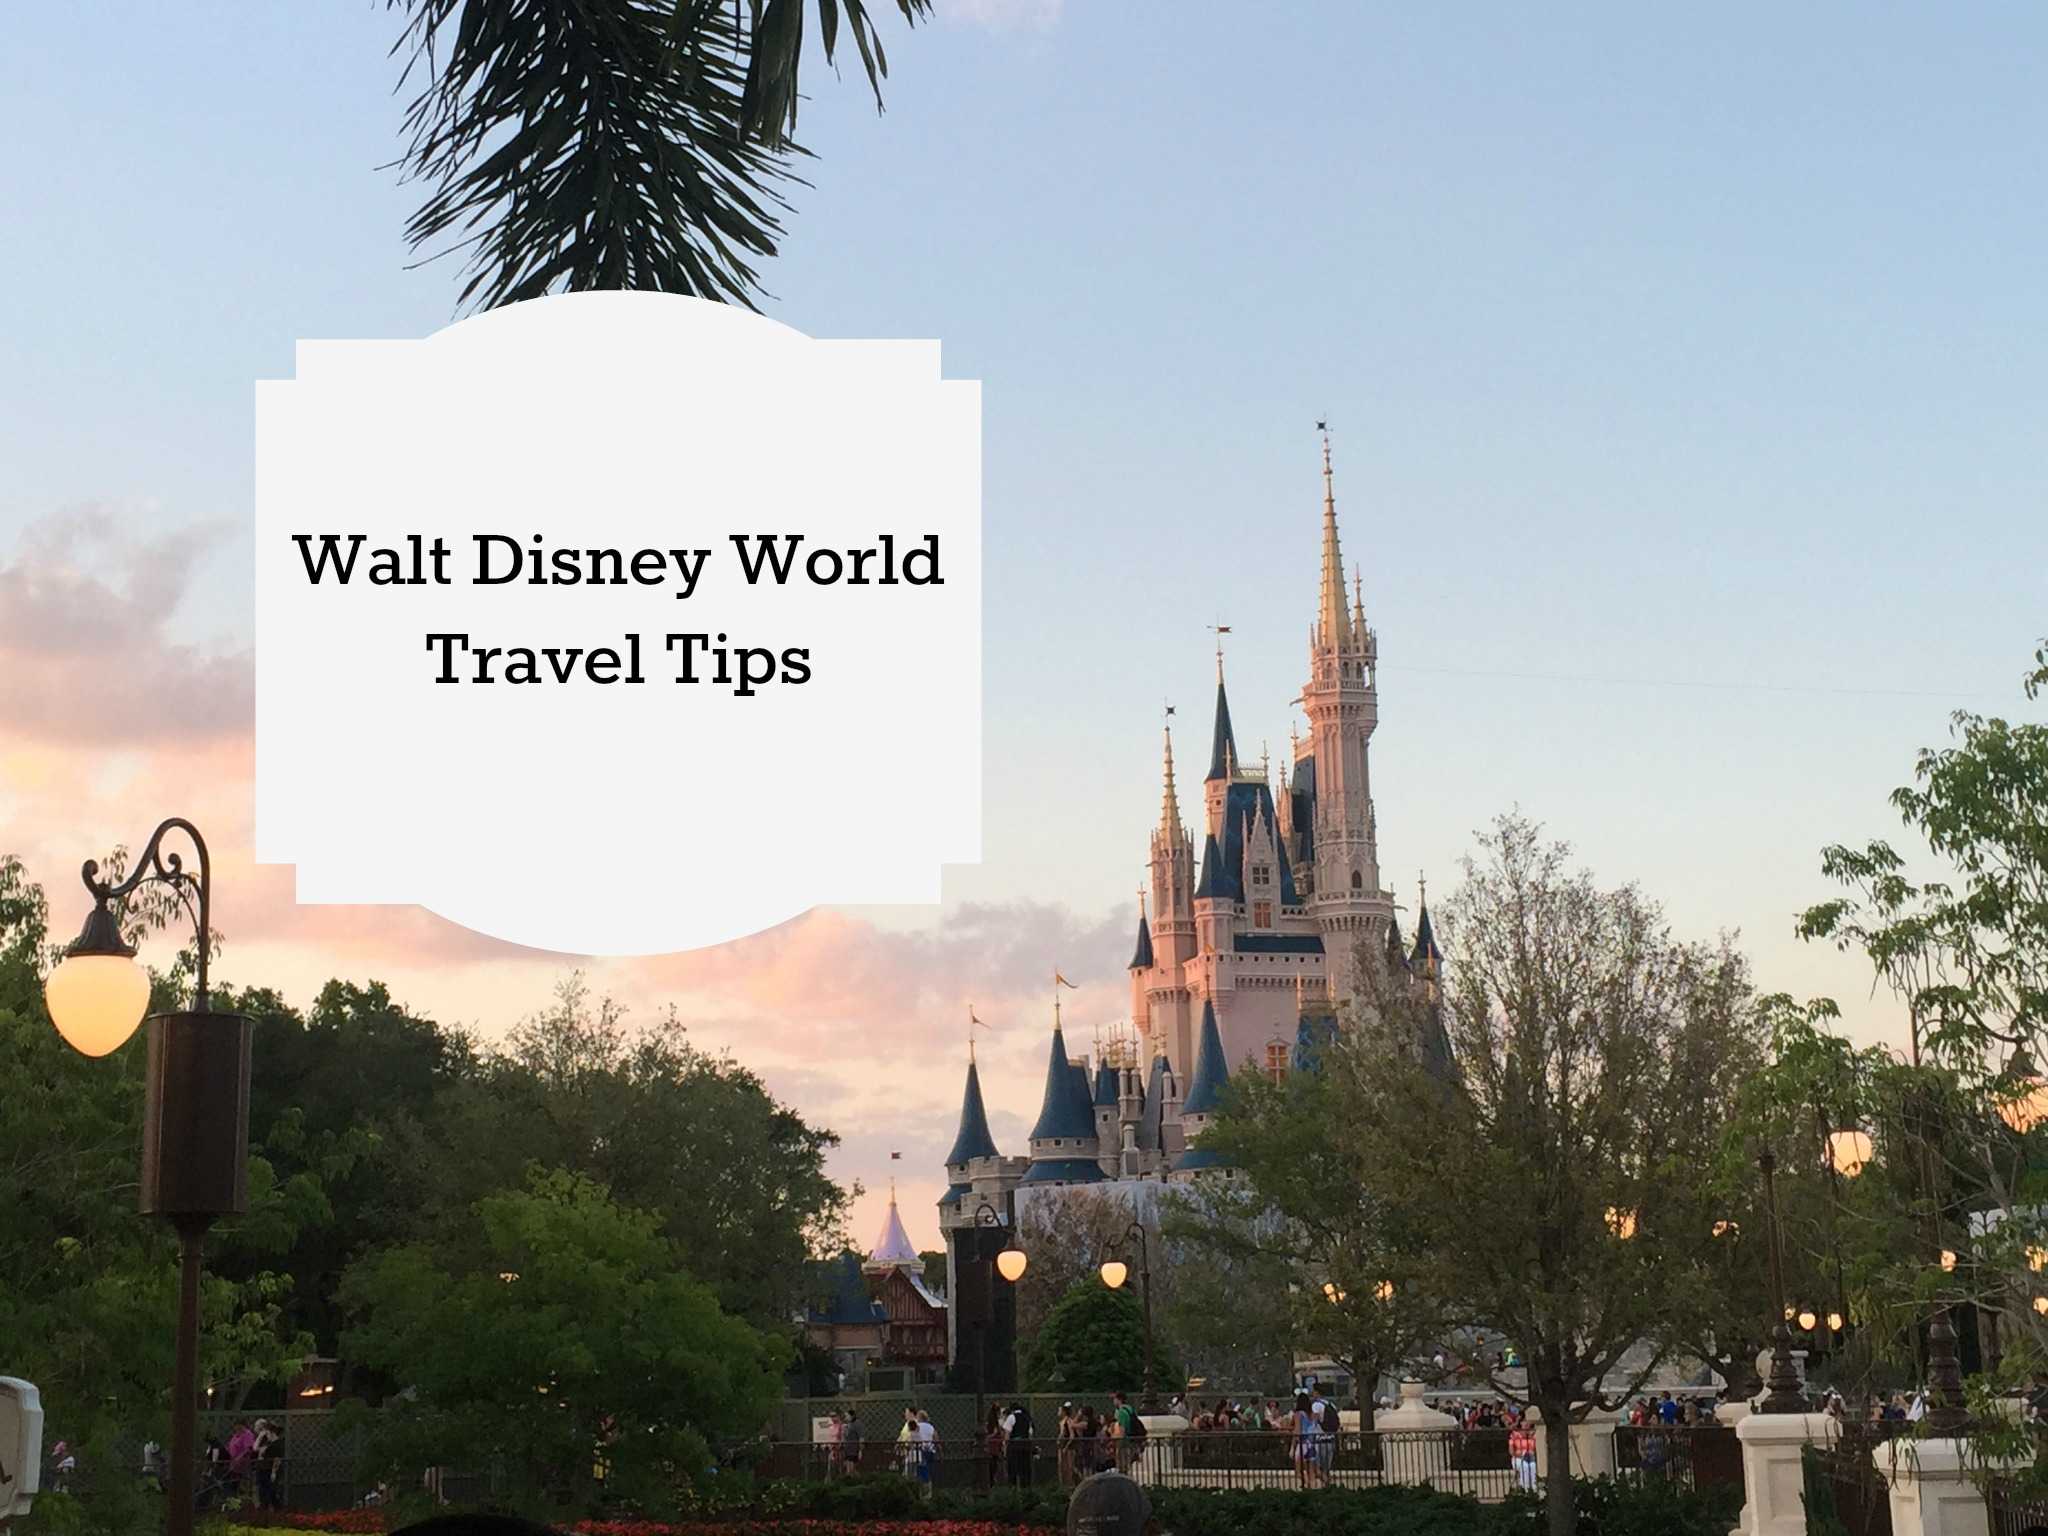 Tips to plan your next Walt Disney World vacation